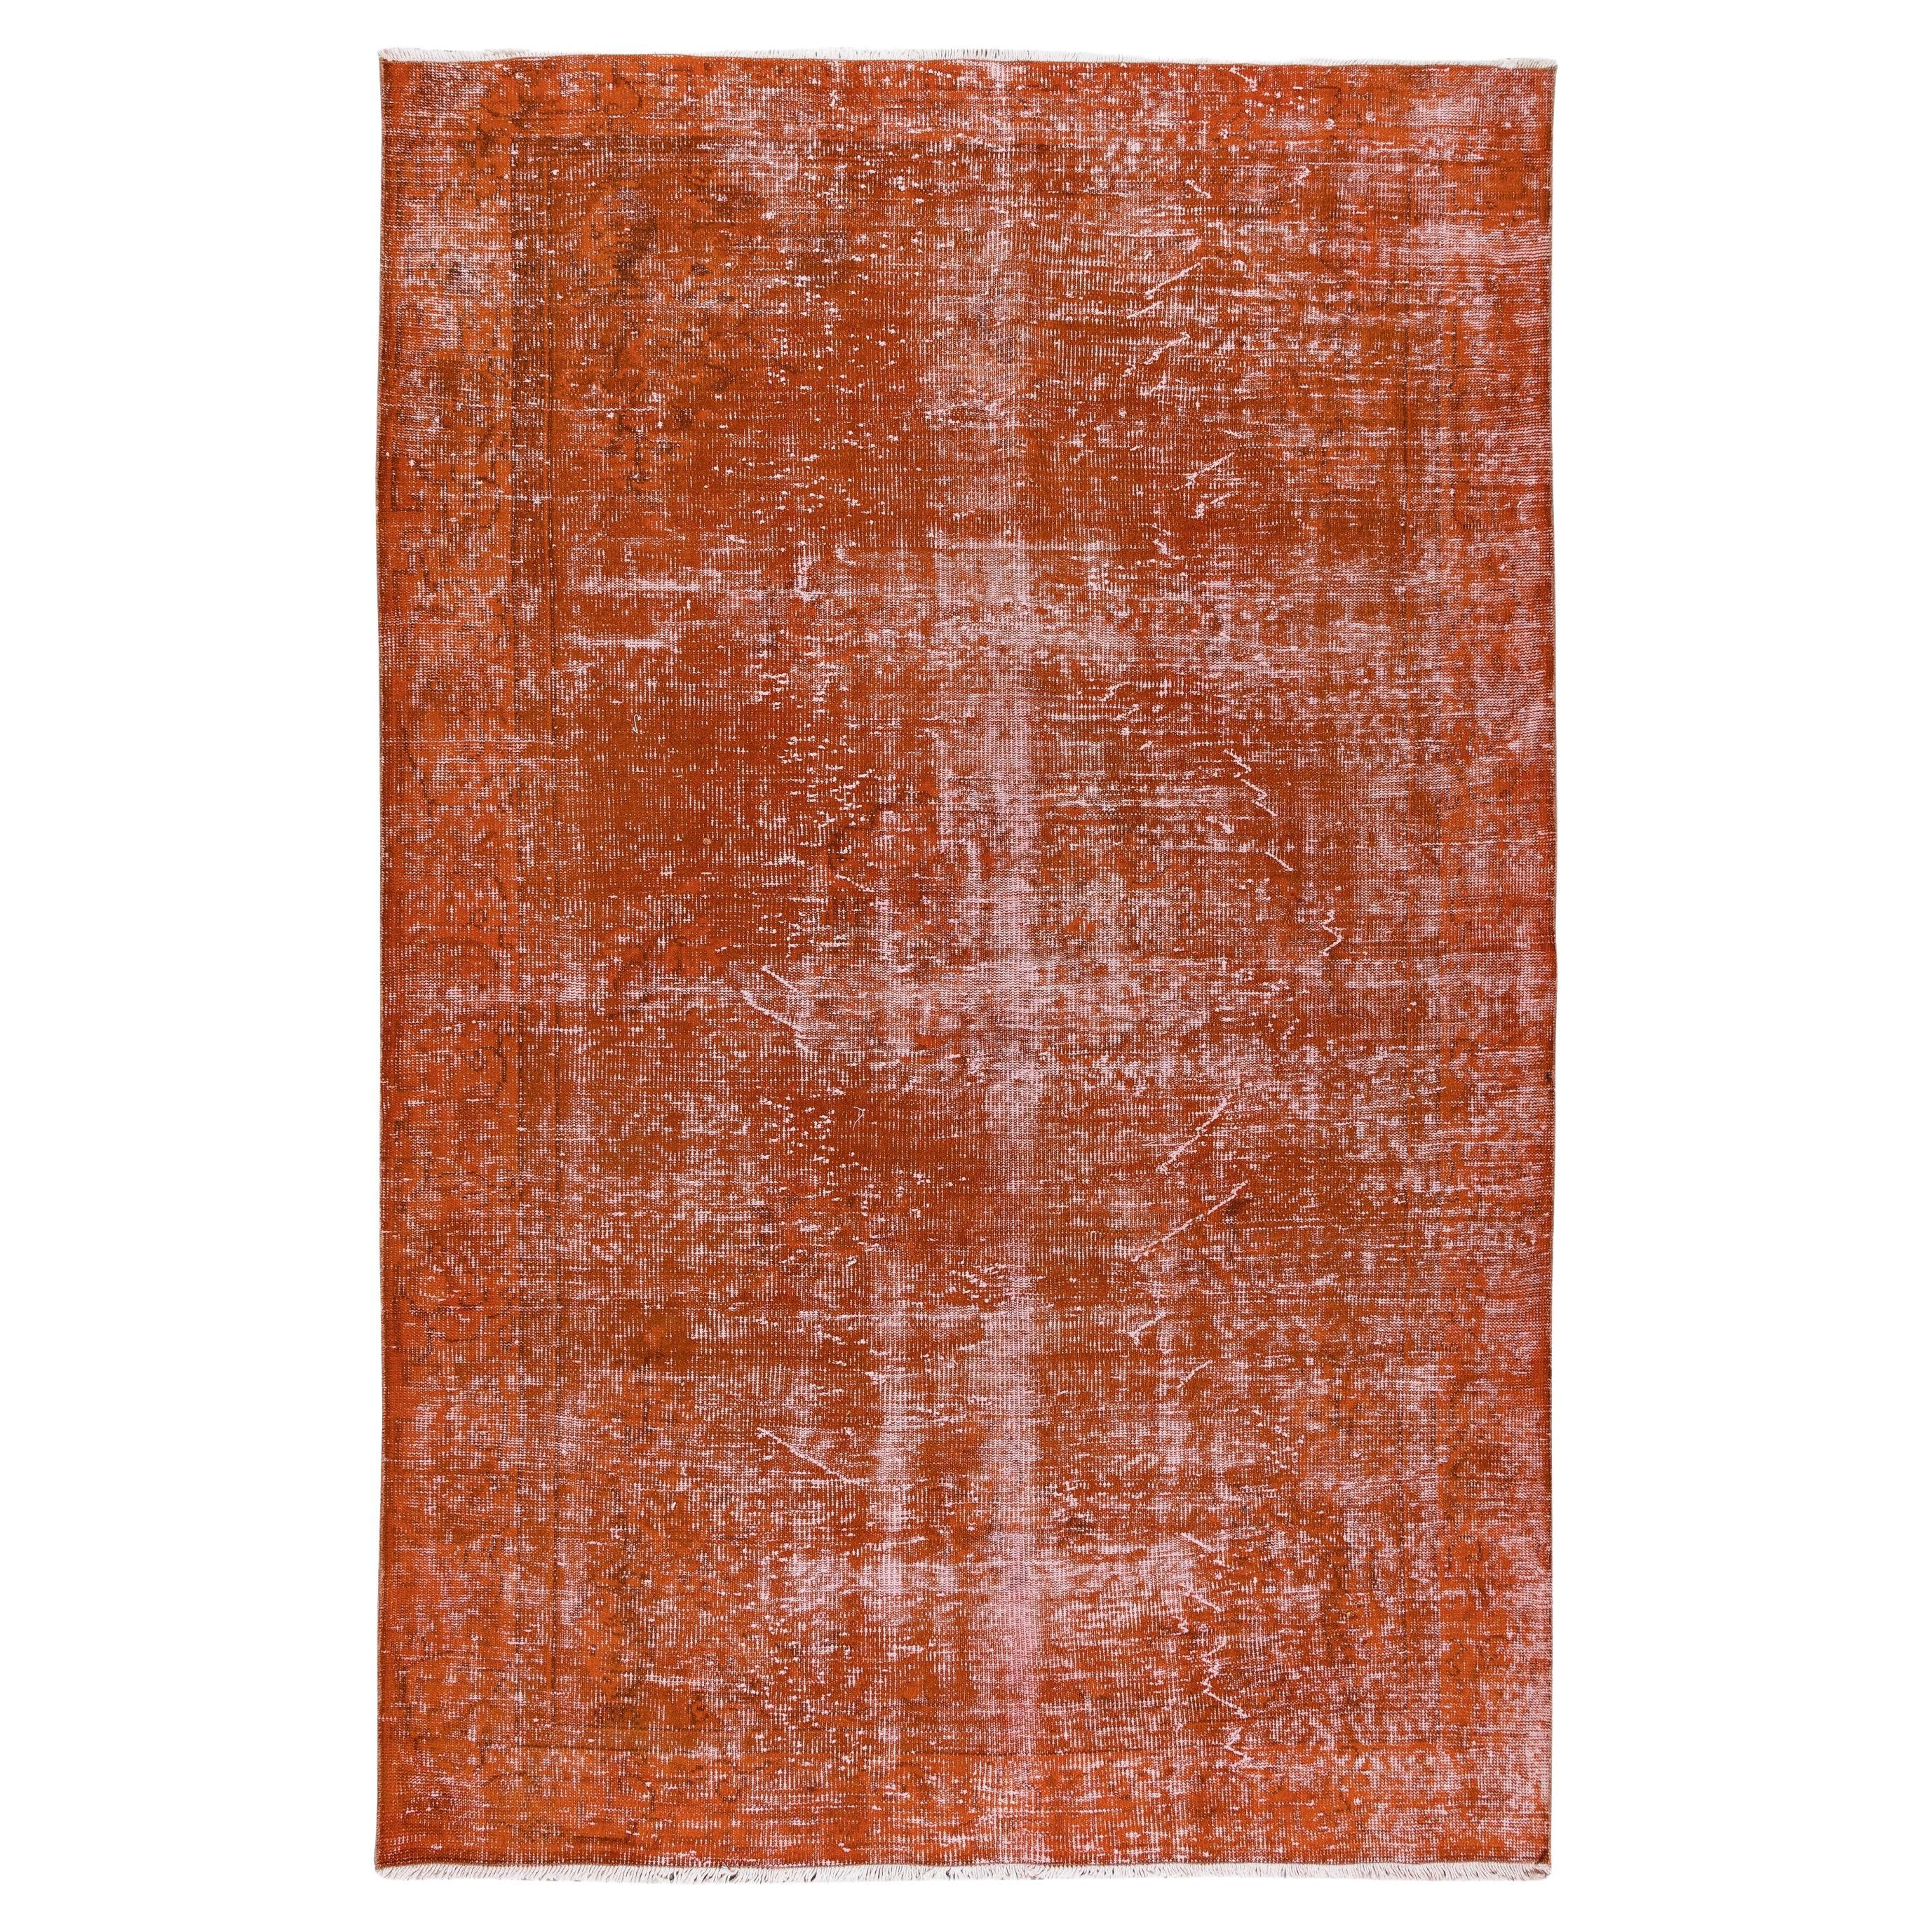 6.6x10 Ft Handmade Turkish Area Rug Re-Dyed in Orange for Modern Interiors For Sale